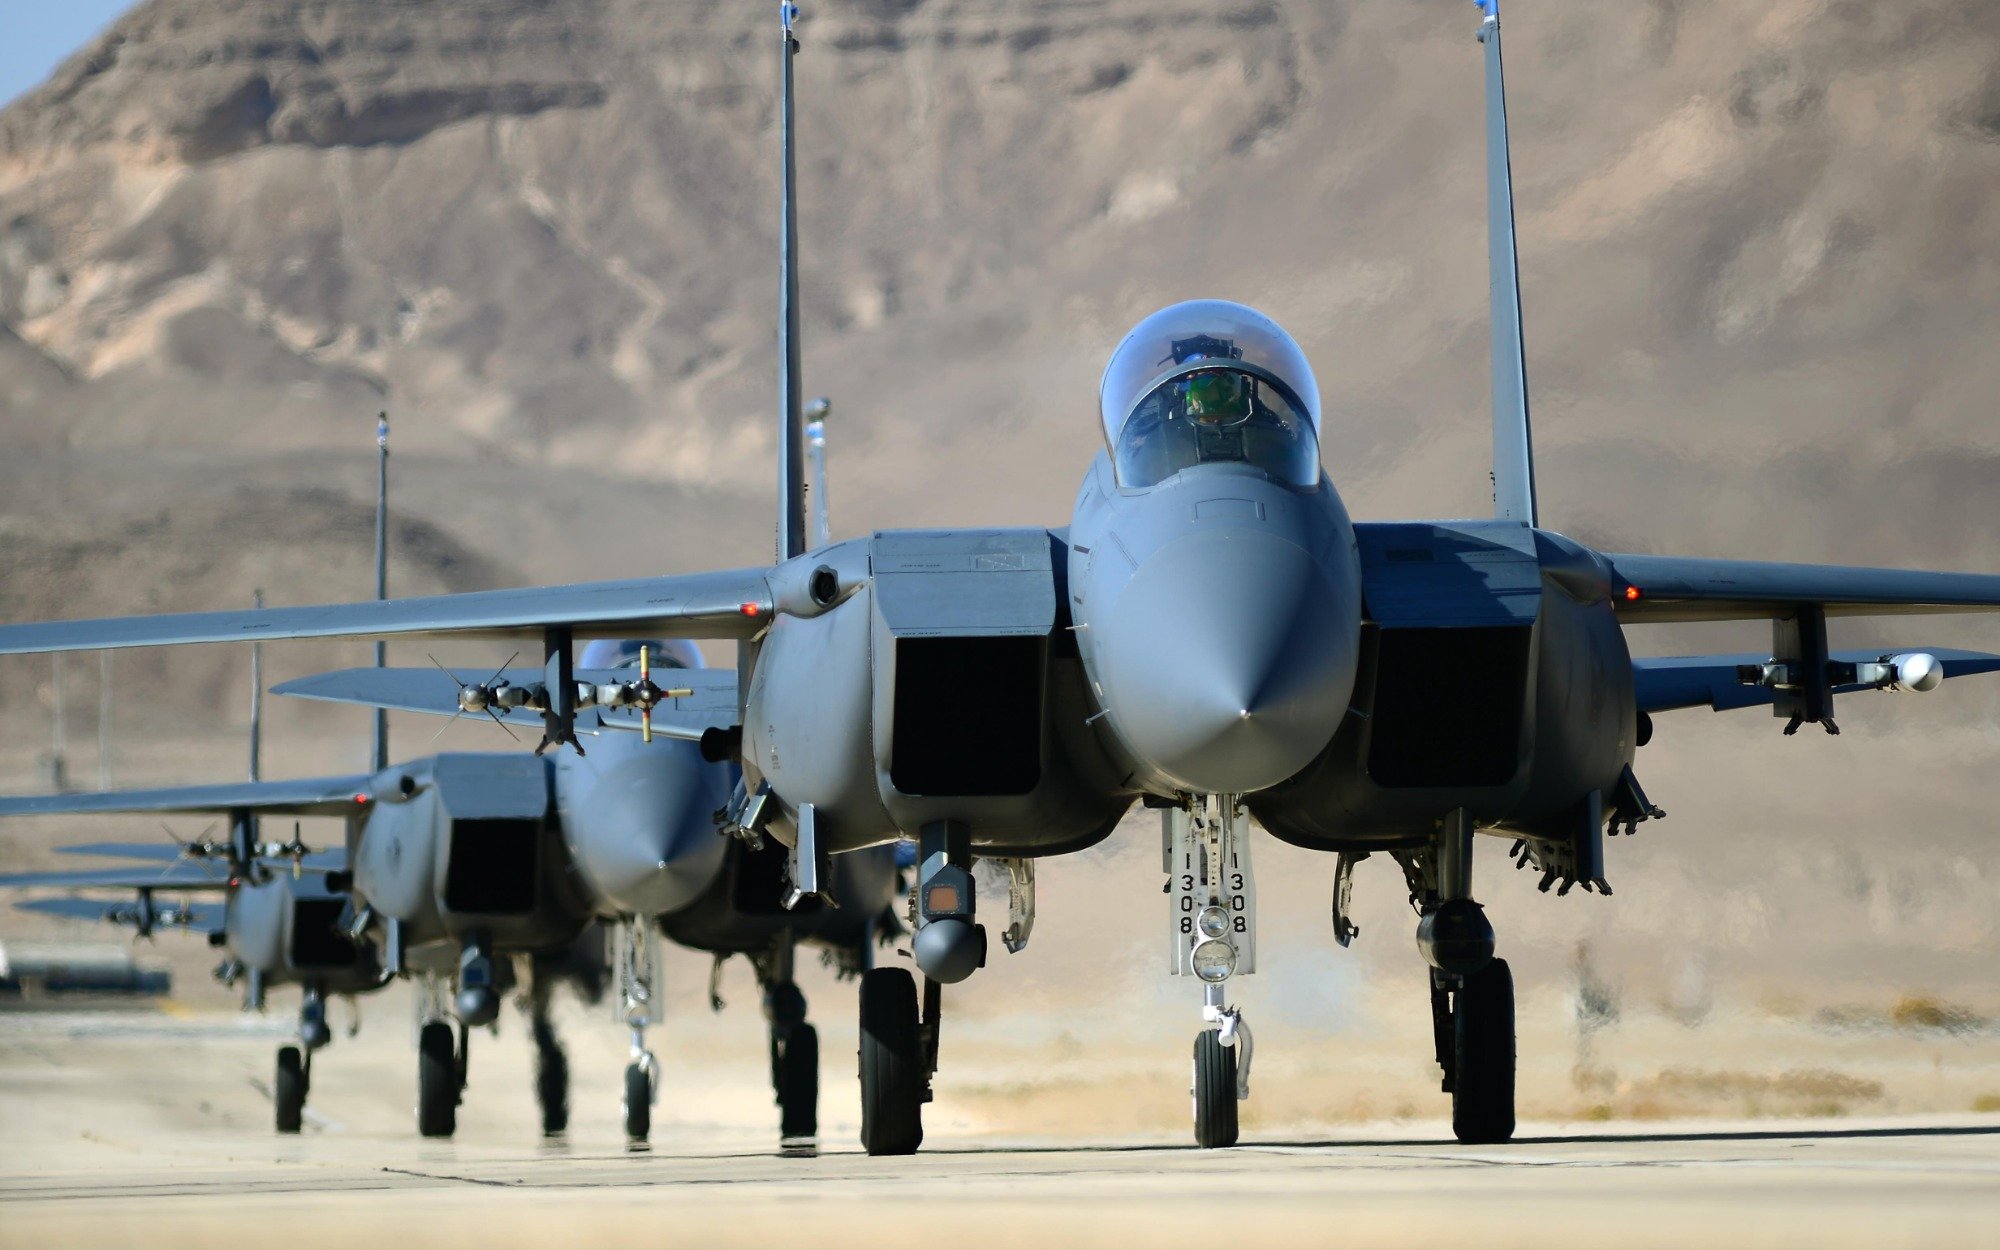 The Aging F-15 Eagle Is Still a Formidable Fighter | The National Interest